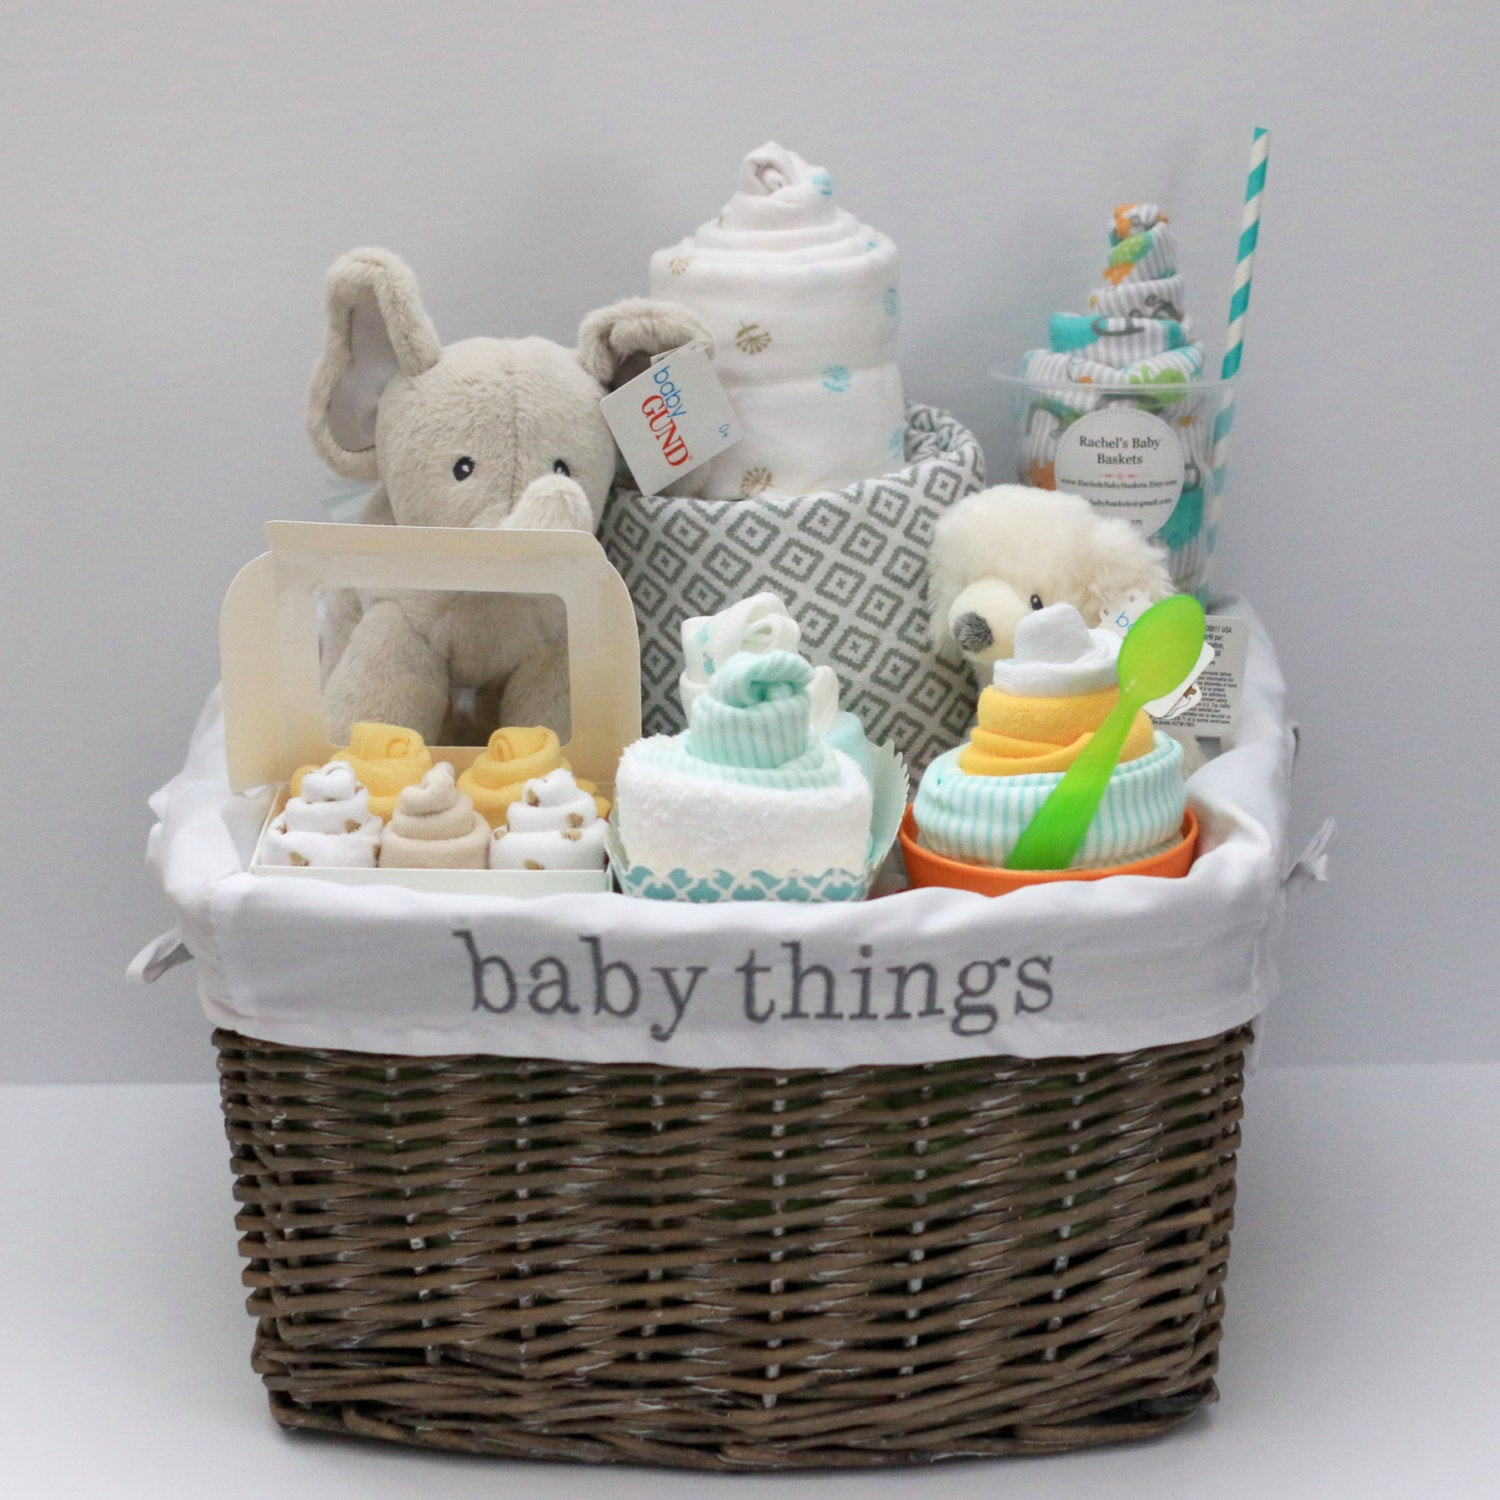 Best ideas about Personalized Baby Shower Gift Ideas
. Save or Pin Gender Neutral Baby Gift Basket Baby Shower Gift Unique Baby Now.